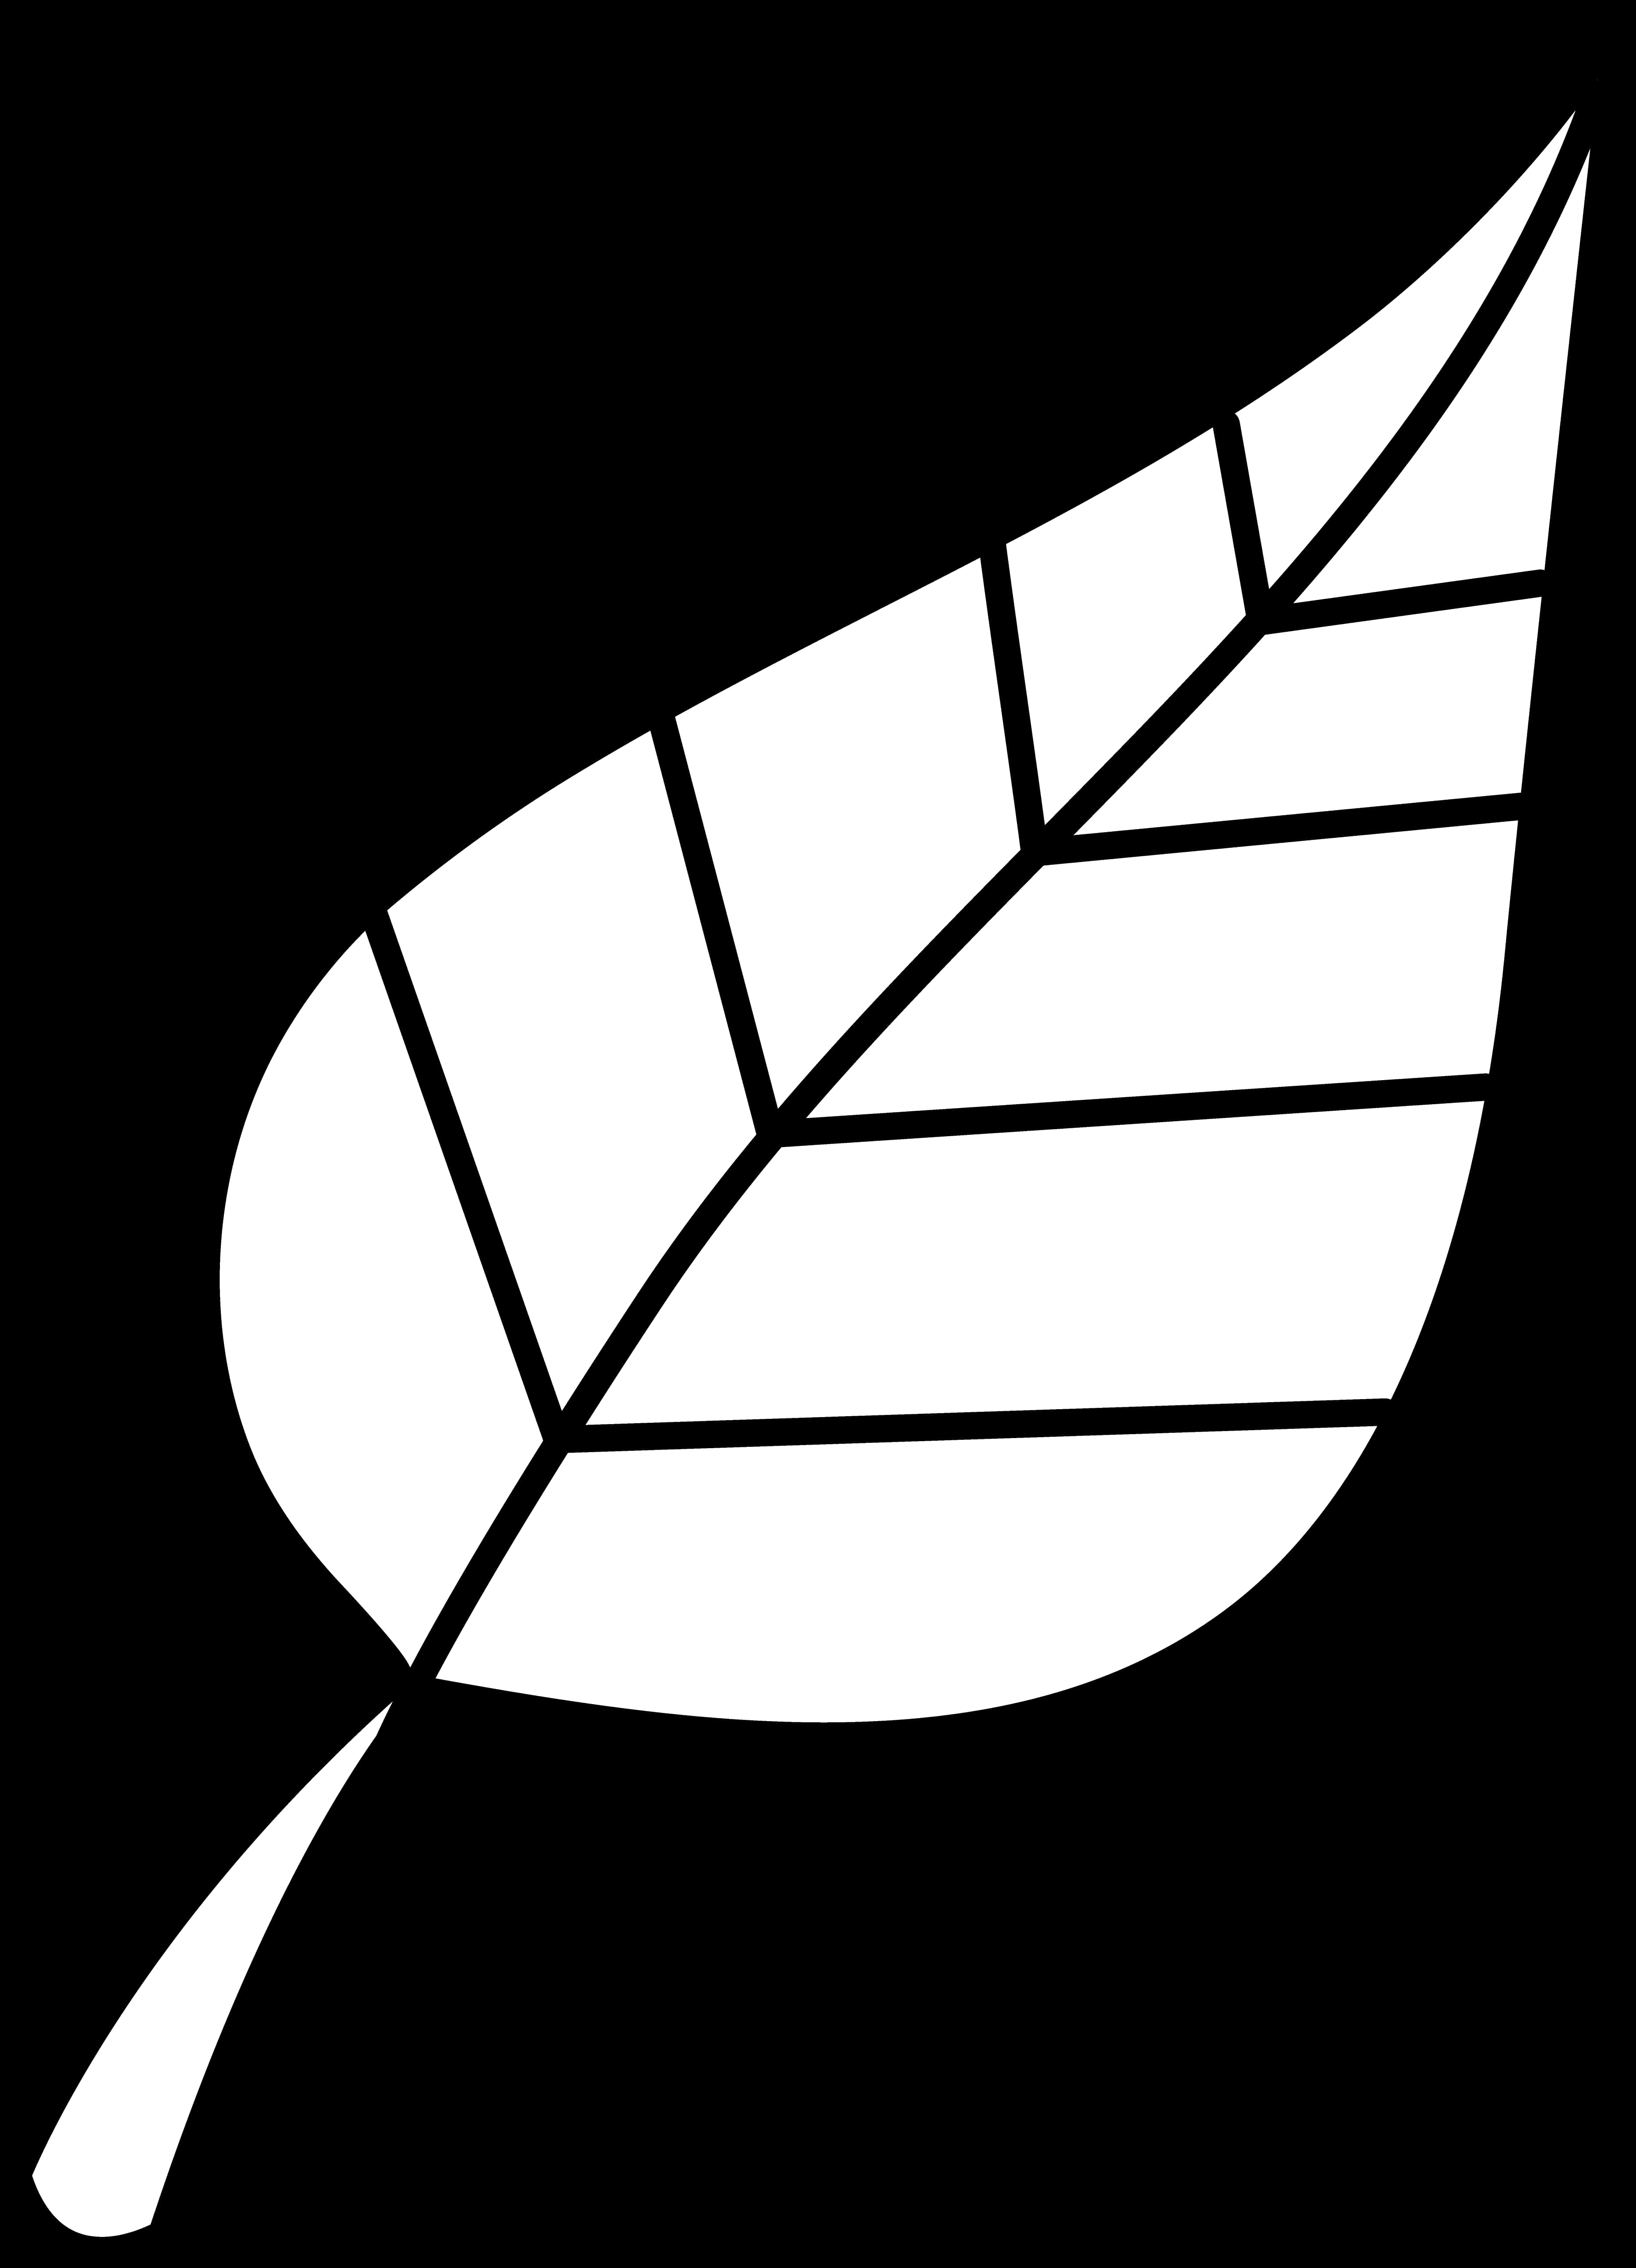 Simplified Leaf Graphic Blackand White PNG image